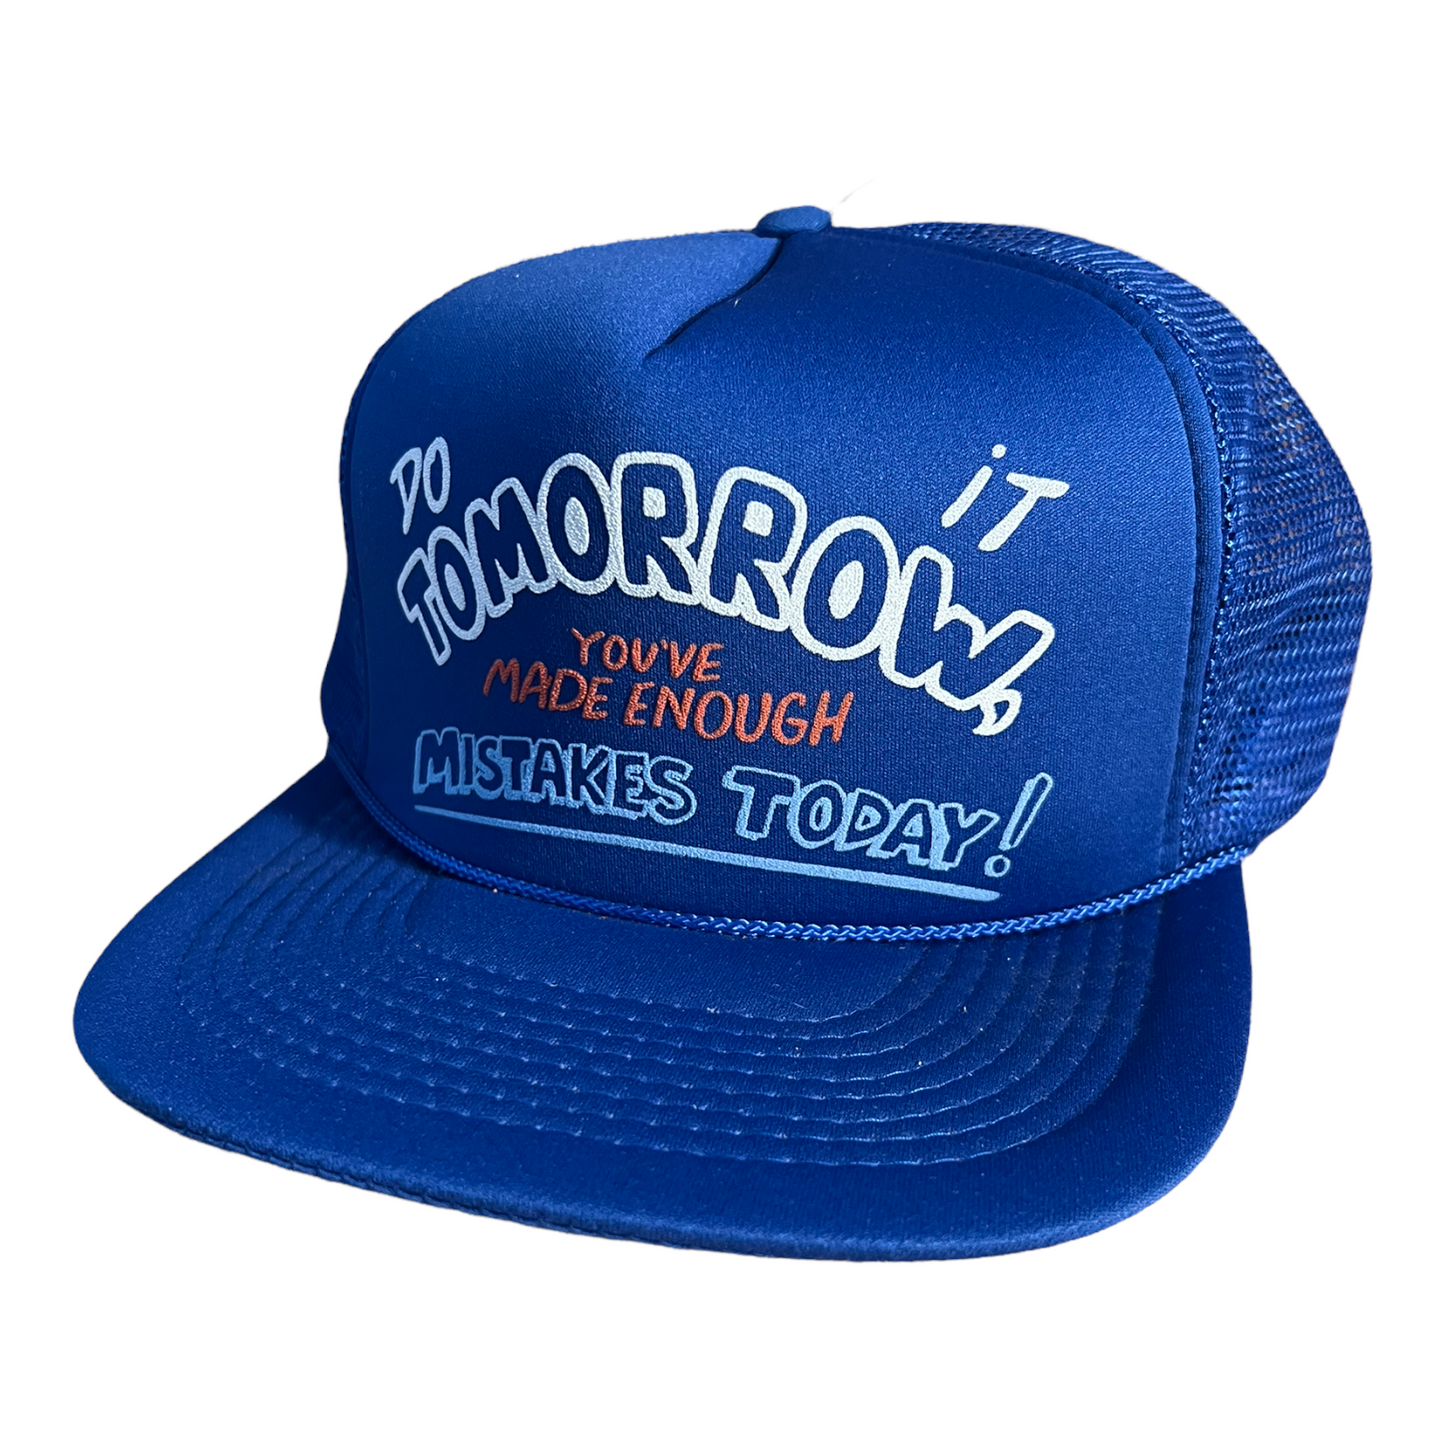 Vintage Do It Tomorrow You've Made Enough Mistakes Today! Trucker Hat Funny Trucker Hat Black/White